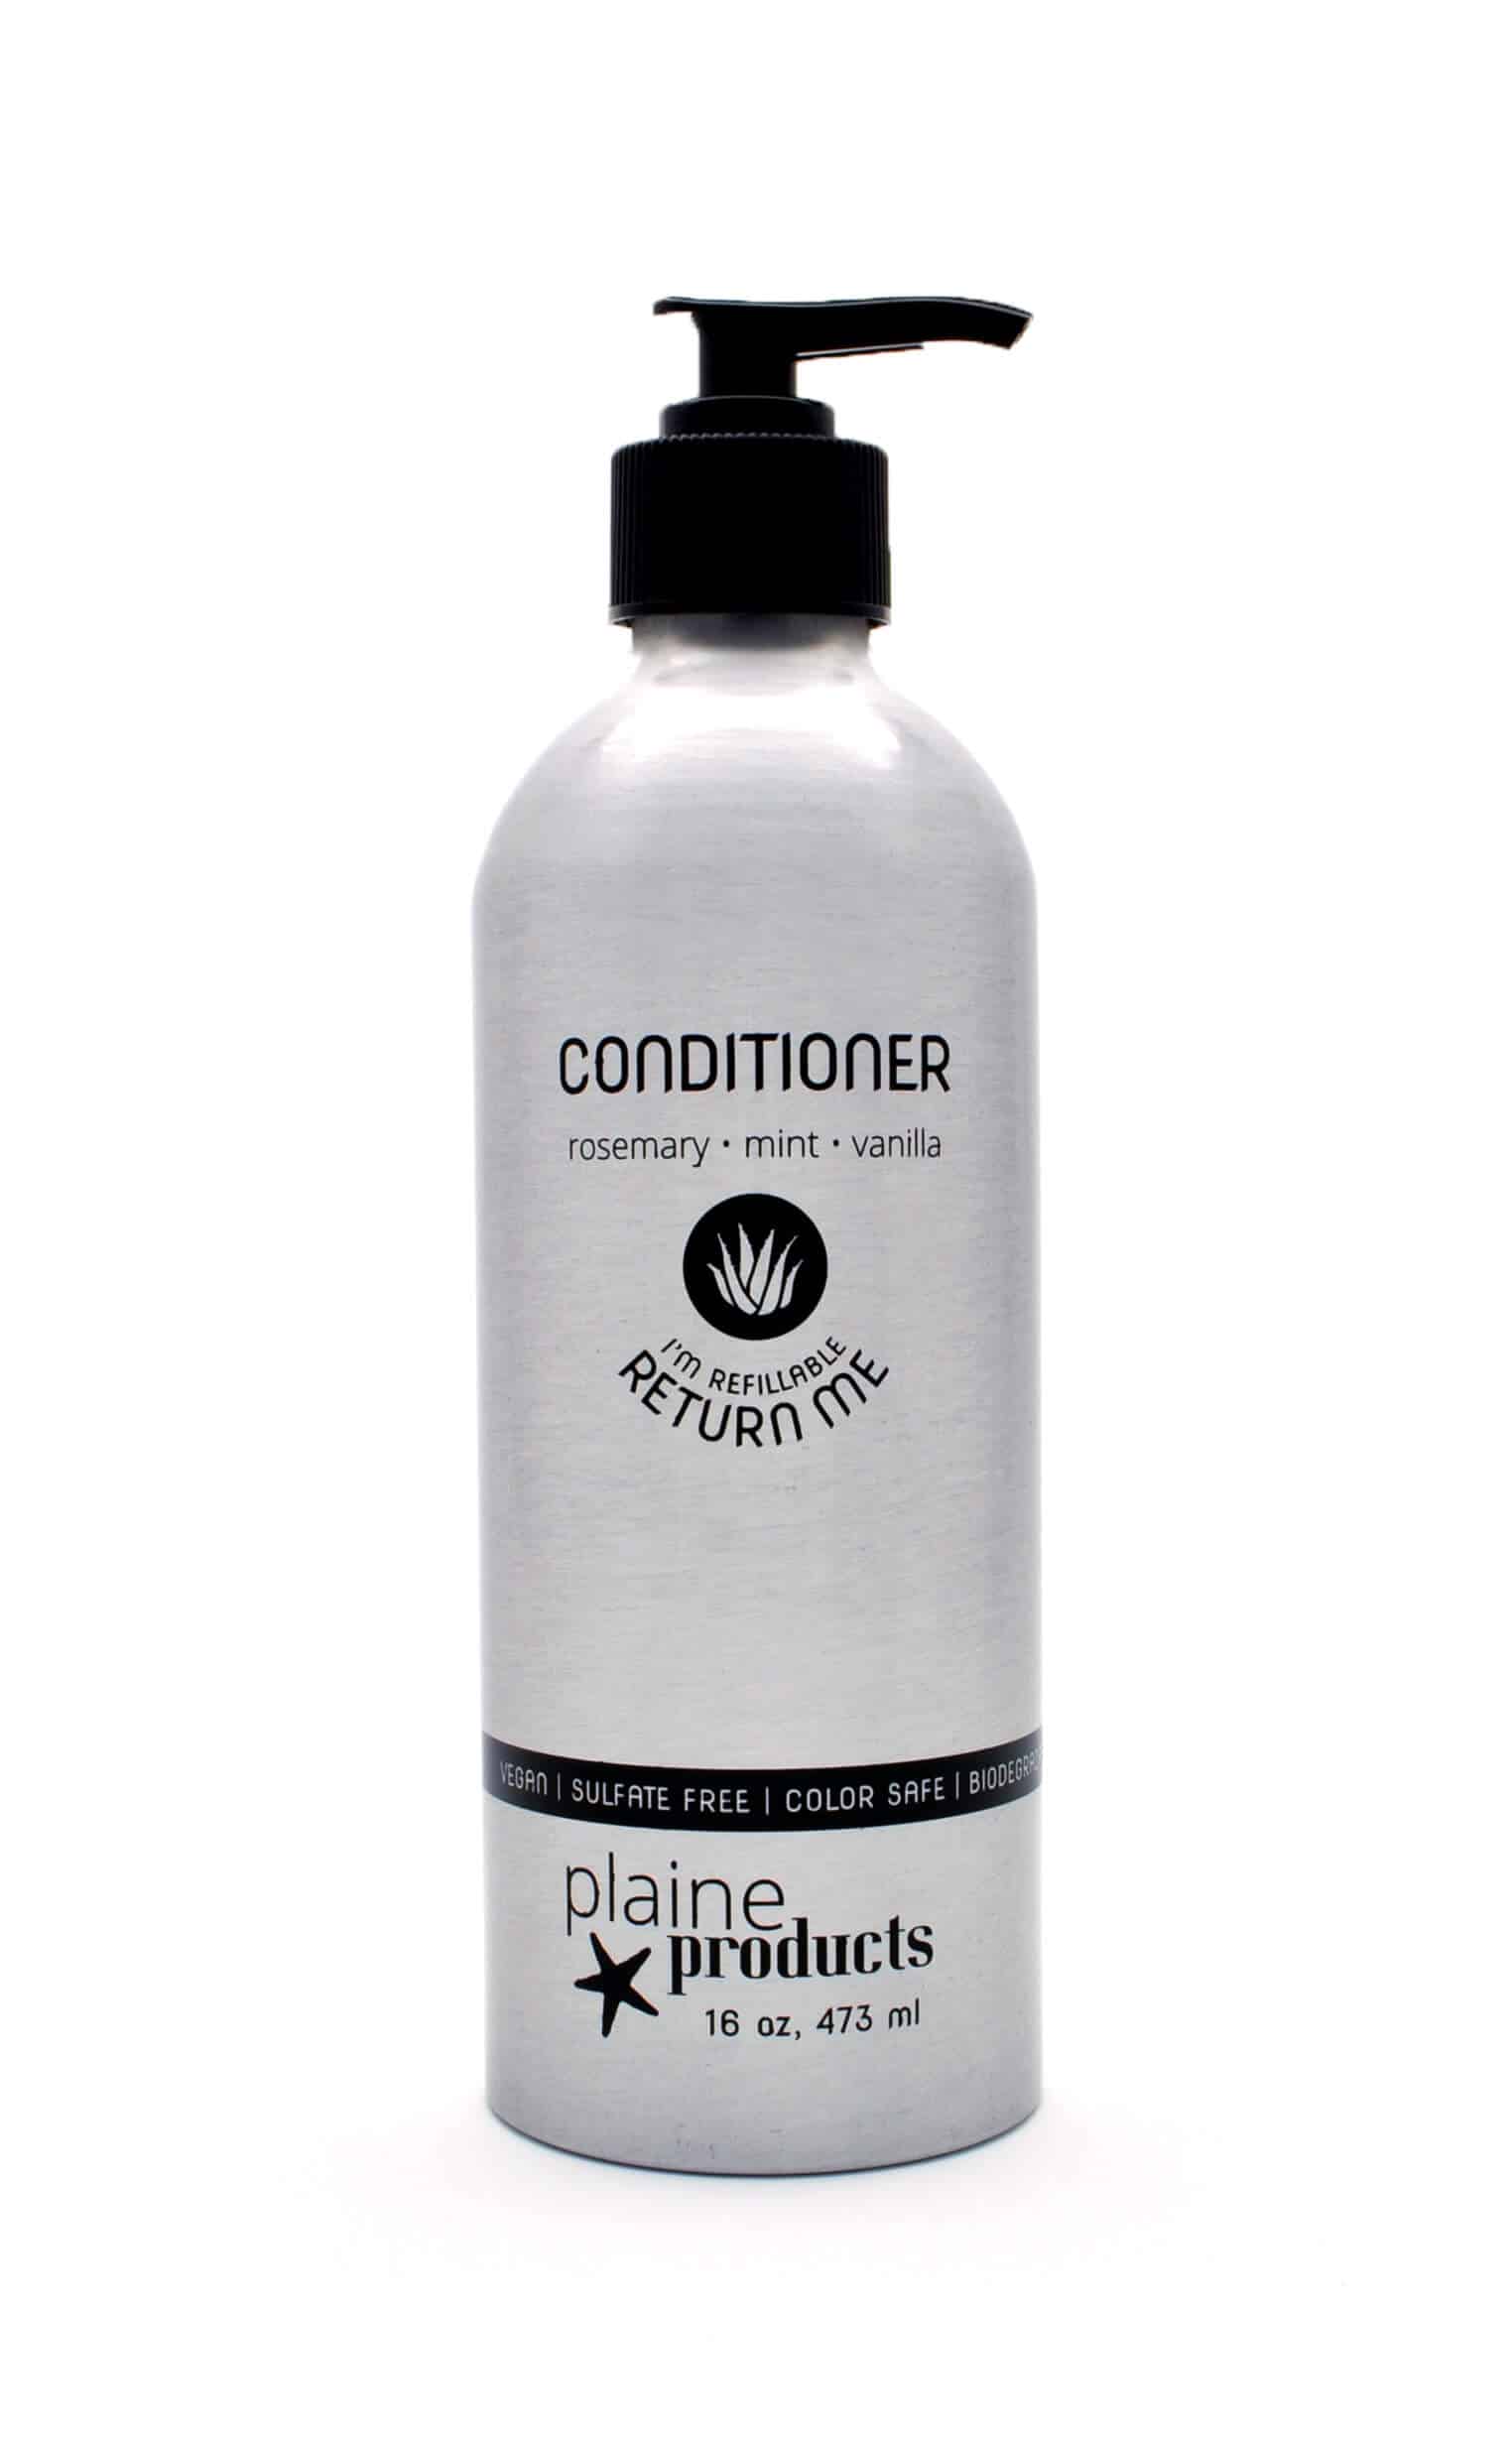 hair conditioner products